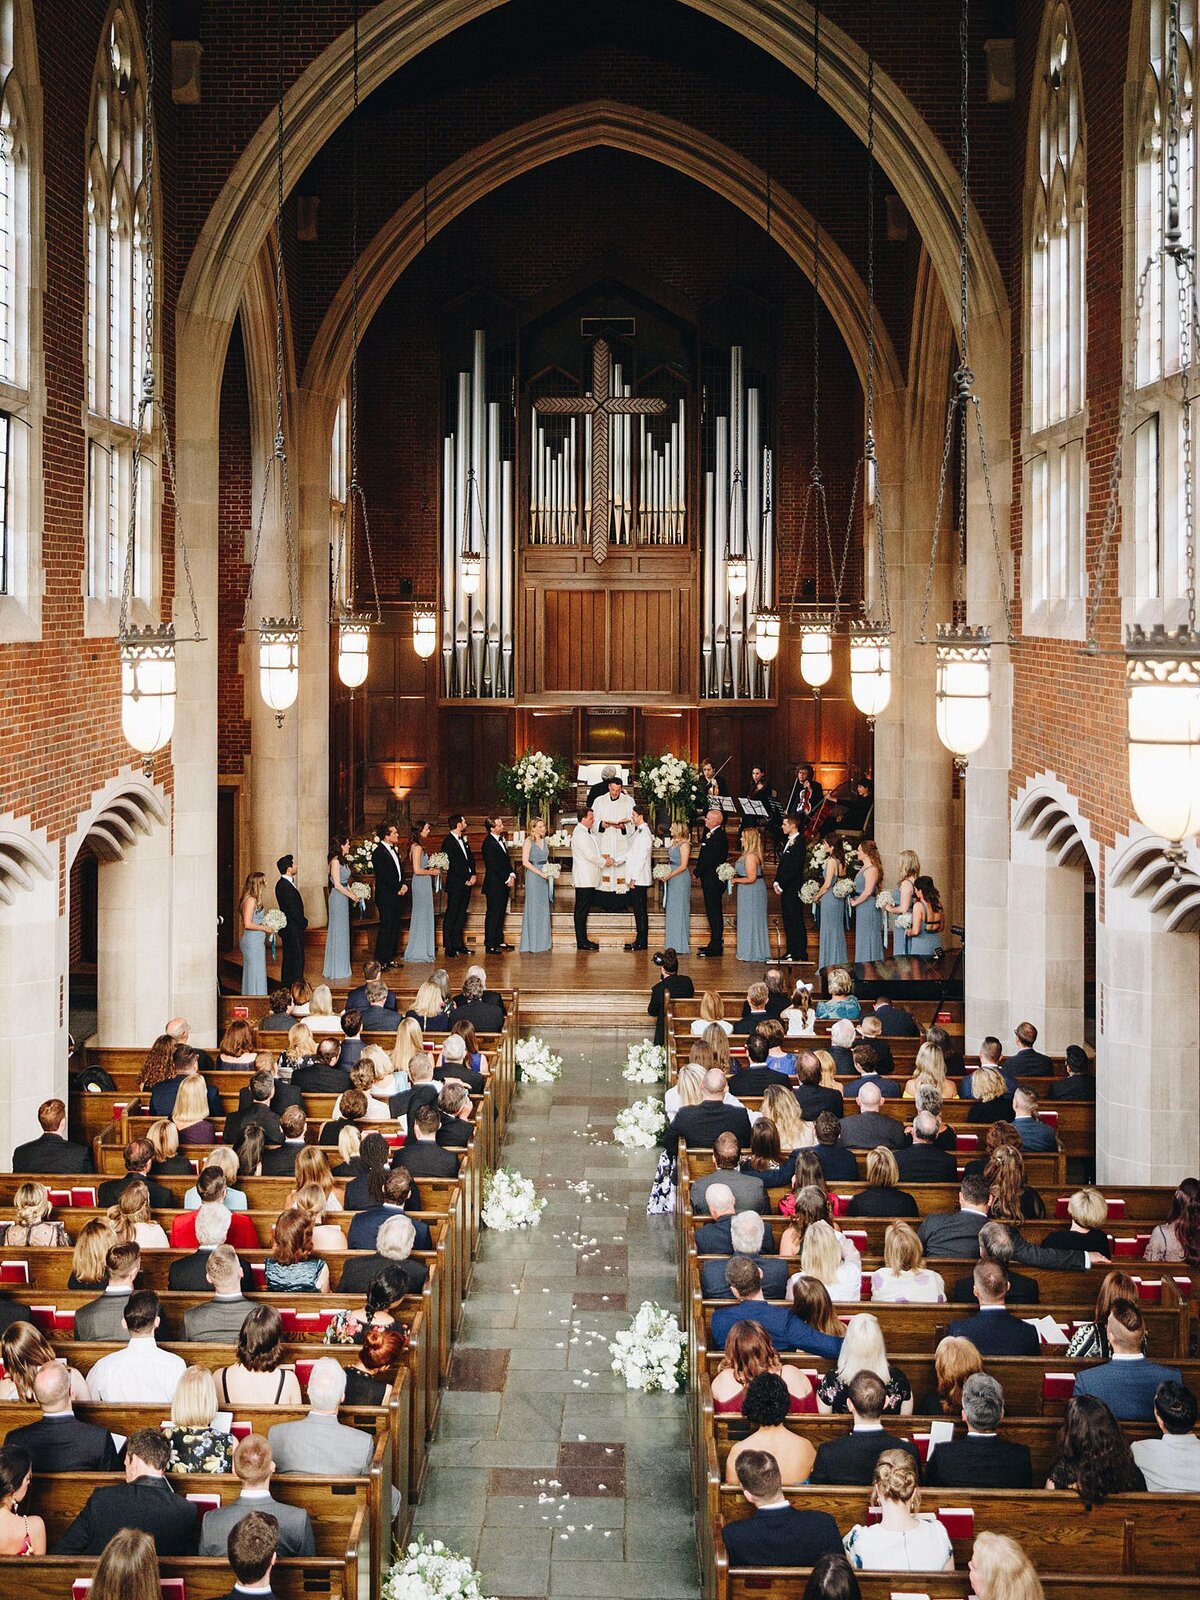 Wedding ceremony for two grooms wearing white tuxedo jackets and black pants at Scarritt Bennet. The stone church aisle is lined with large round white floral arrangements. The church pews are filled with wedding guests and there is a large pipe organ behind the altar. On either side of the grooms is the wedding party dressed in dusty blue dresses and black tuxedos.